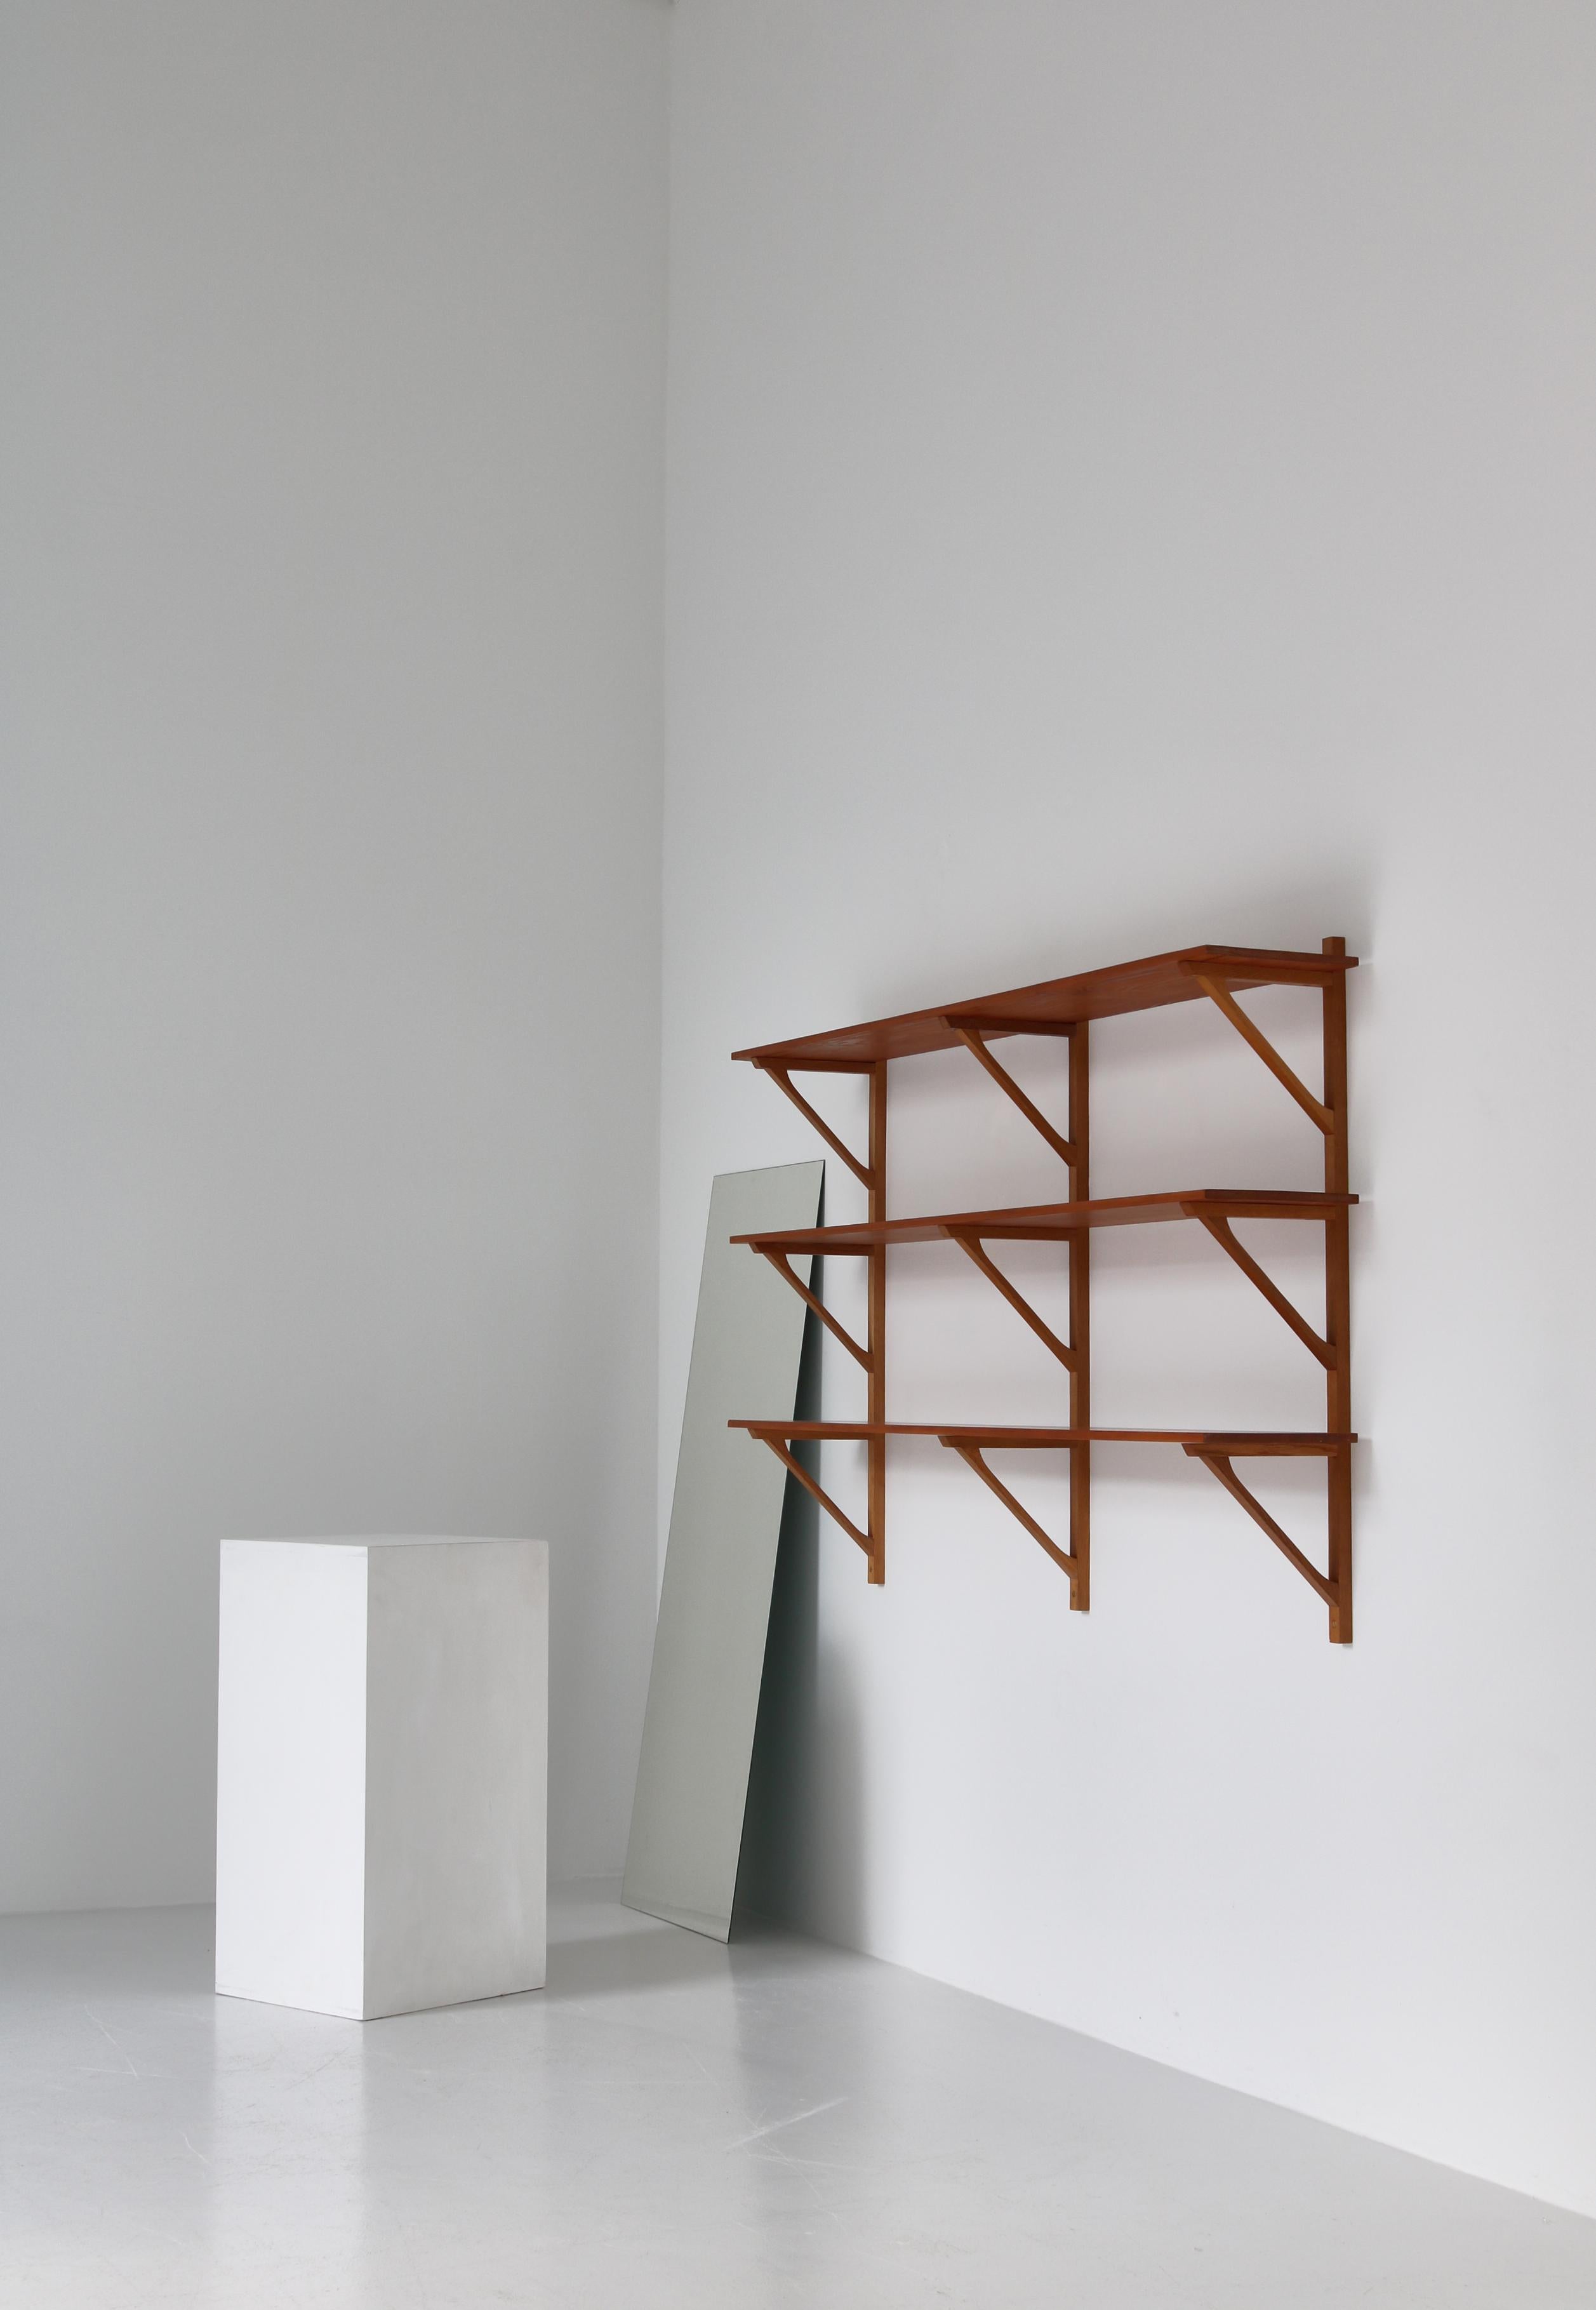 Rare large wall shelving system in oak and pinewood designed by Børge Mogensen in 1956. This early edition was made at cabinetmaker Erhard Rasmussen before the production was taken over by Fredericia Stolefabrik.

The shelves are made of solid